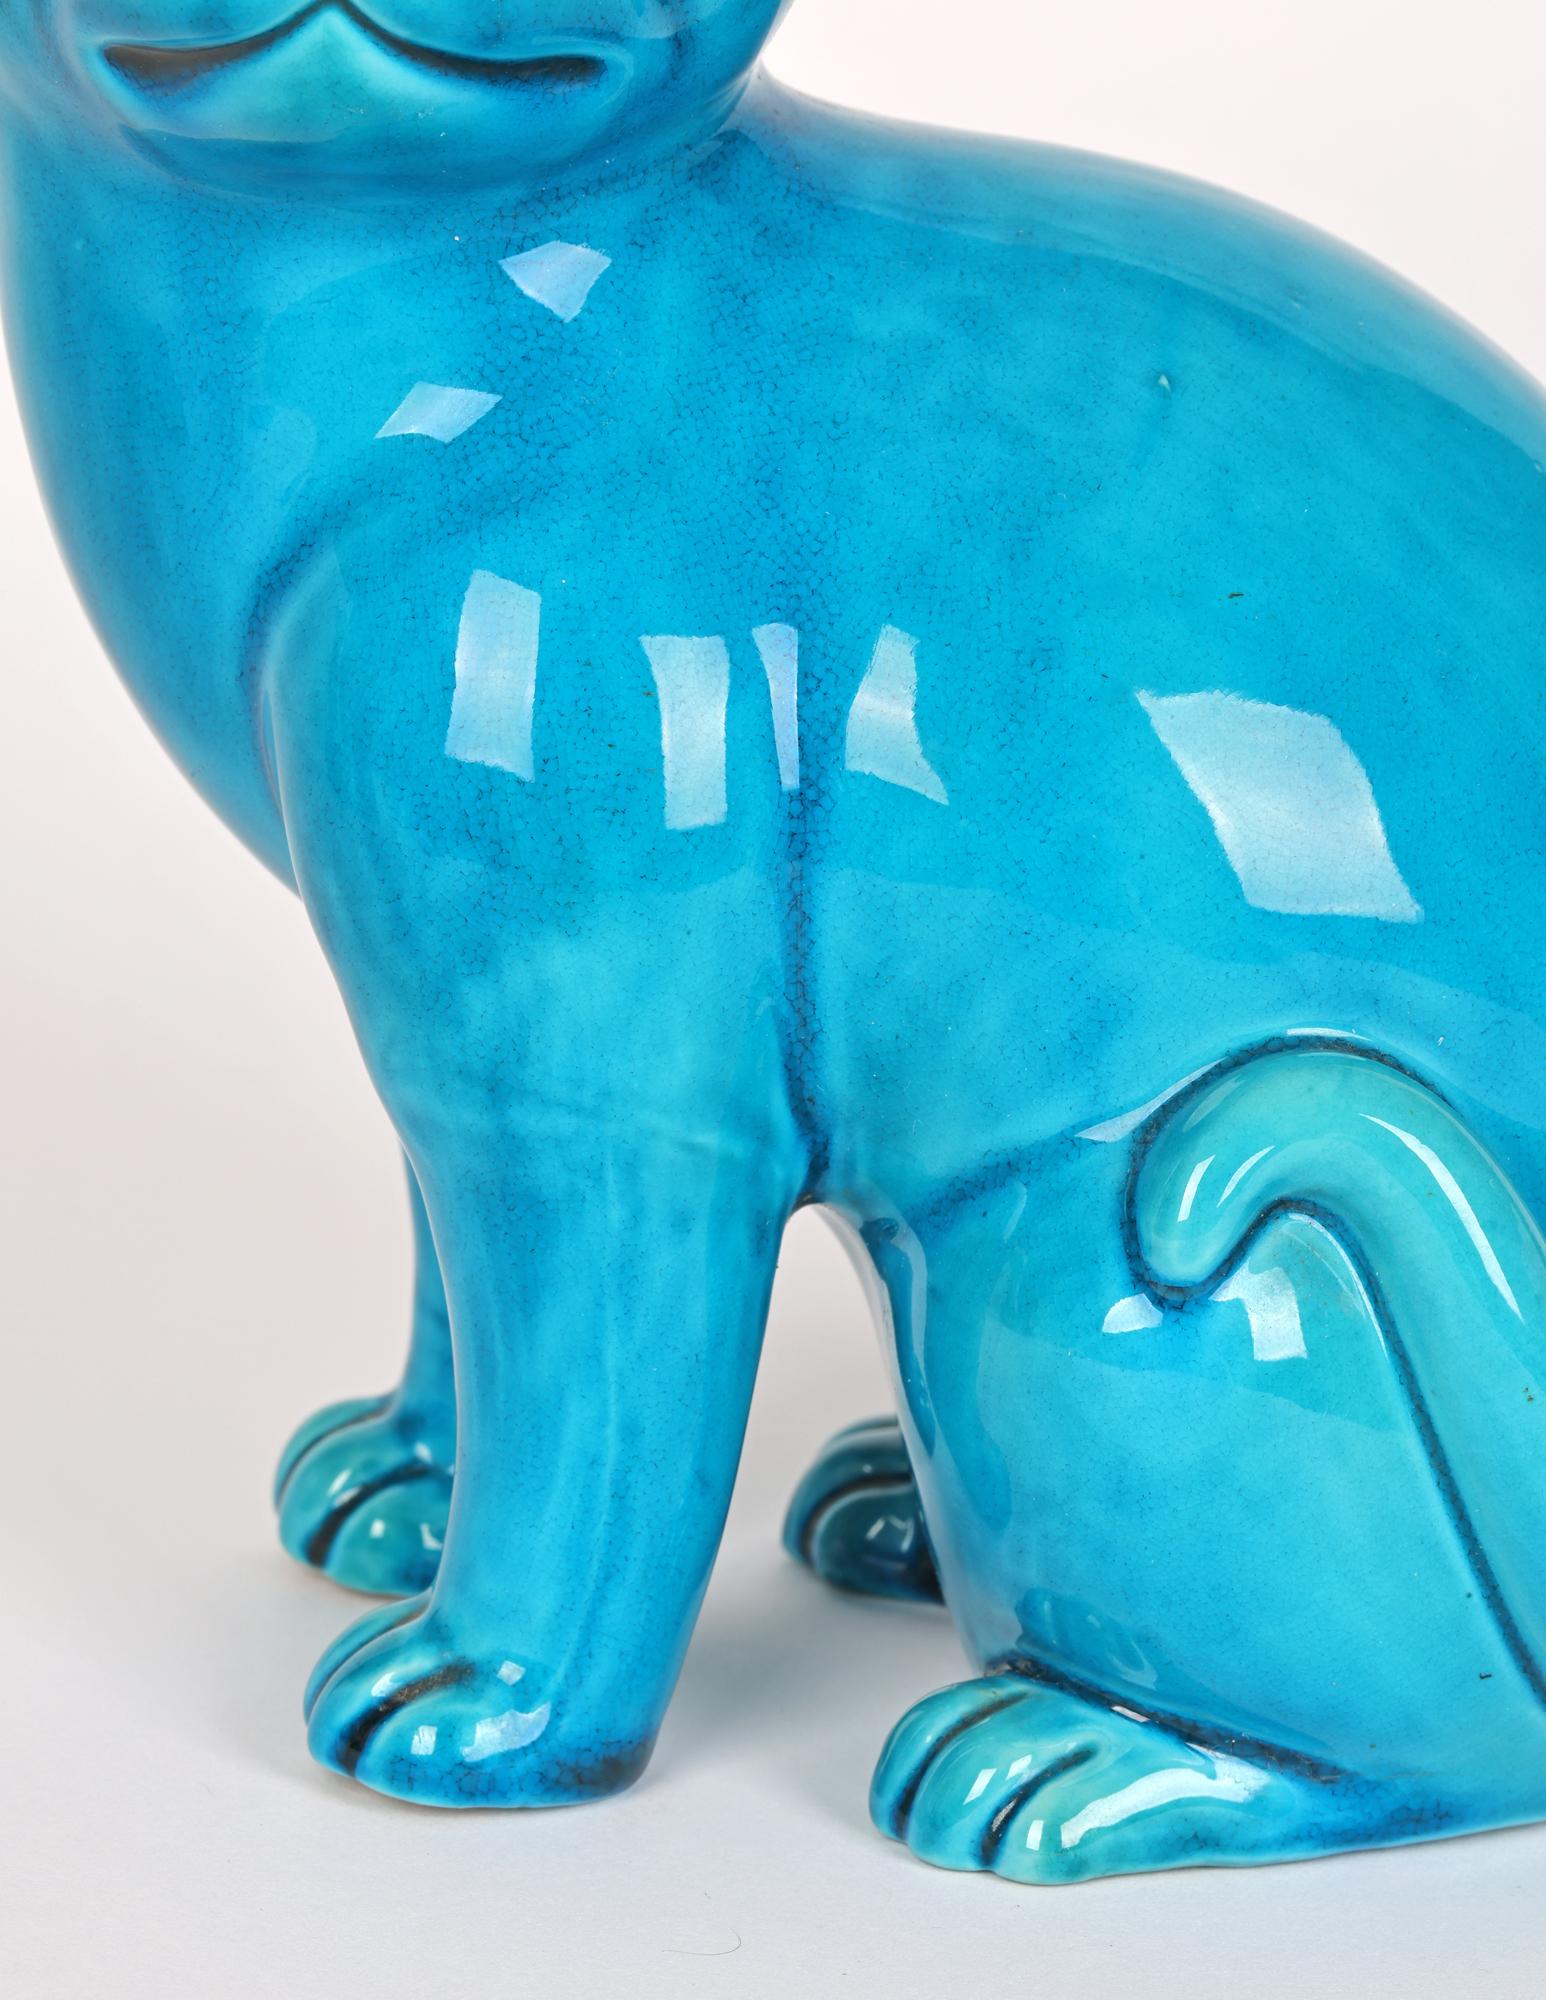 A very stylish Chinese porcelain figure of a seated cat decorated in bright turquoise glazes and dating from around 1920. The large seated cat is well modelled and sits glancing sideways with its tail resting on its back leg and with its ears raised